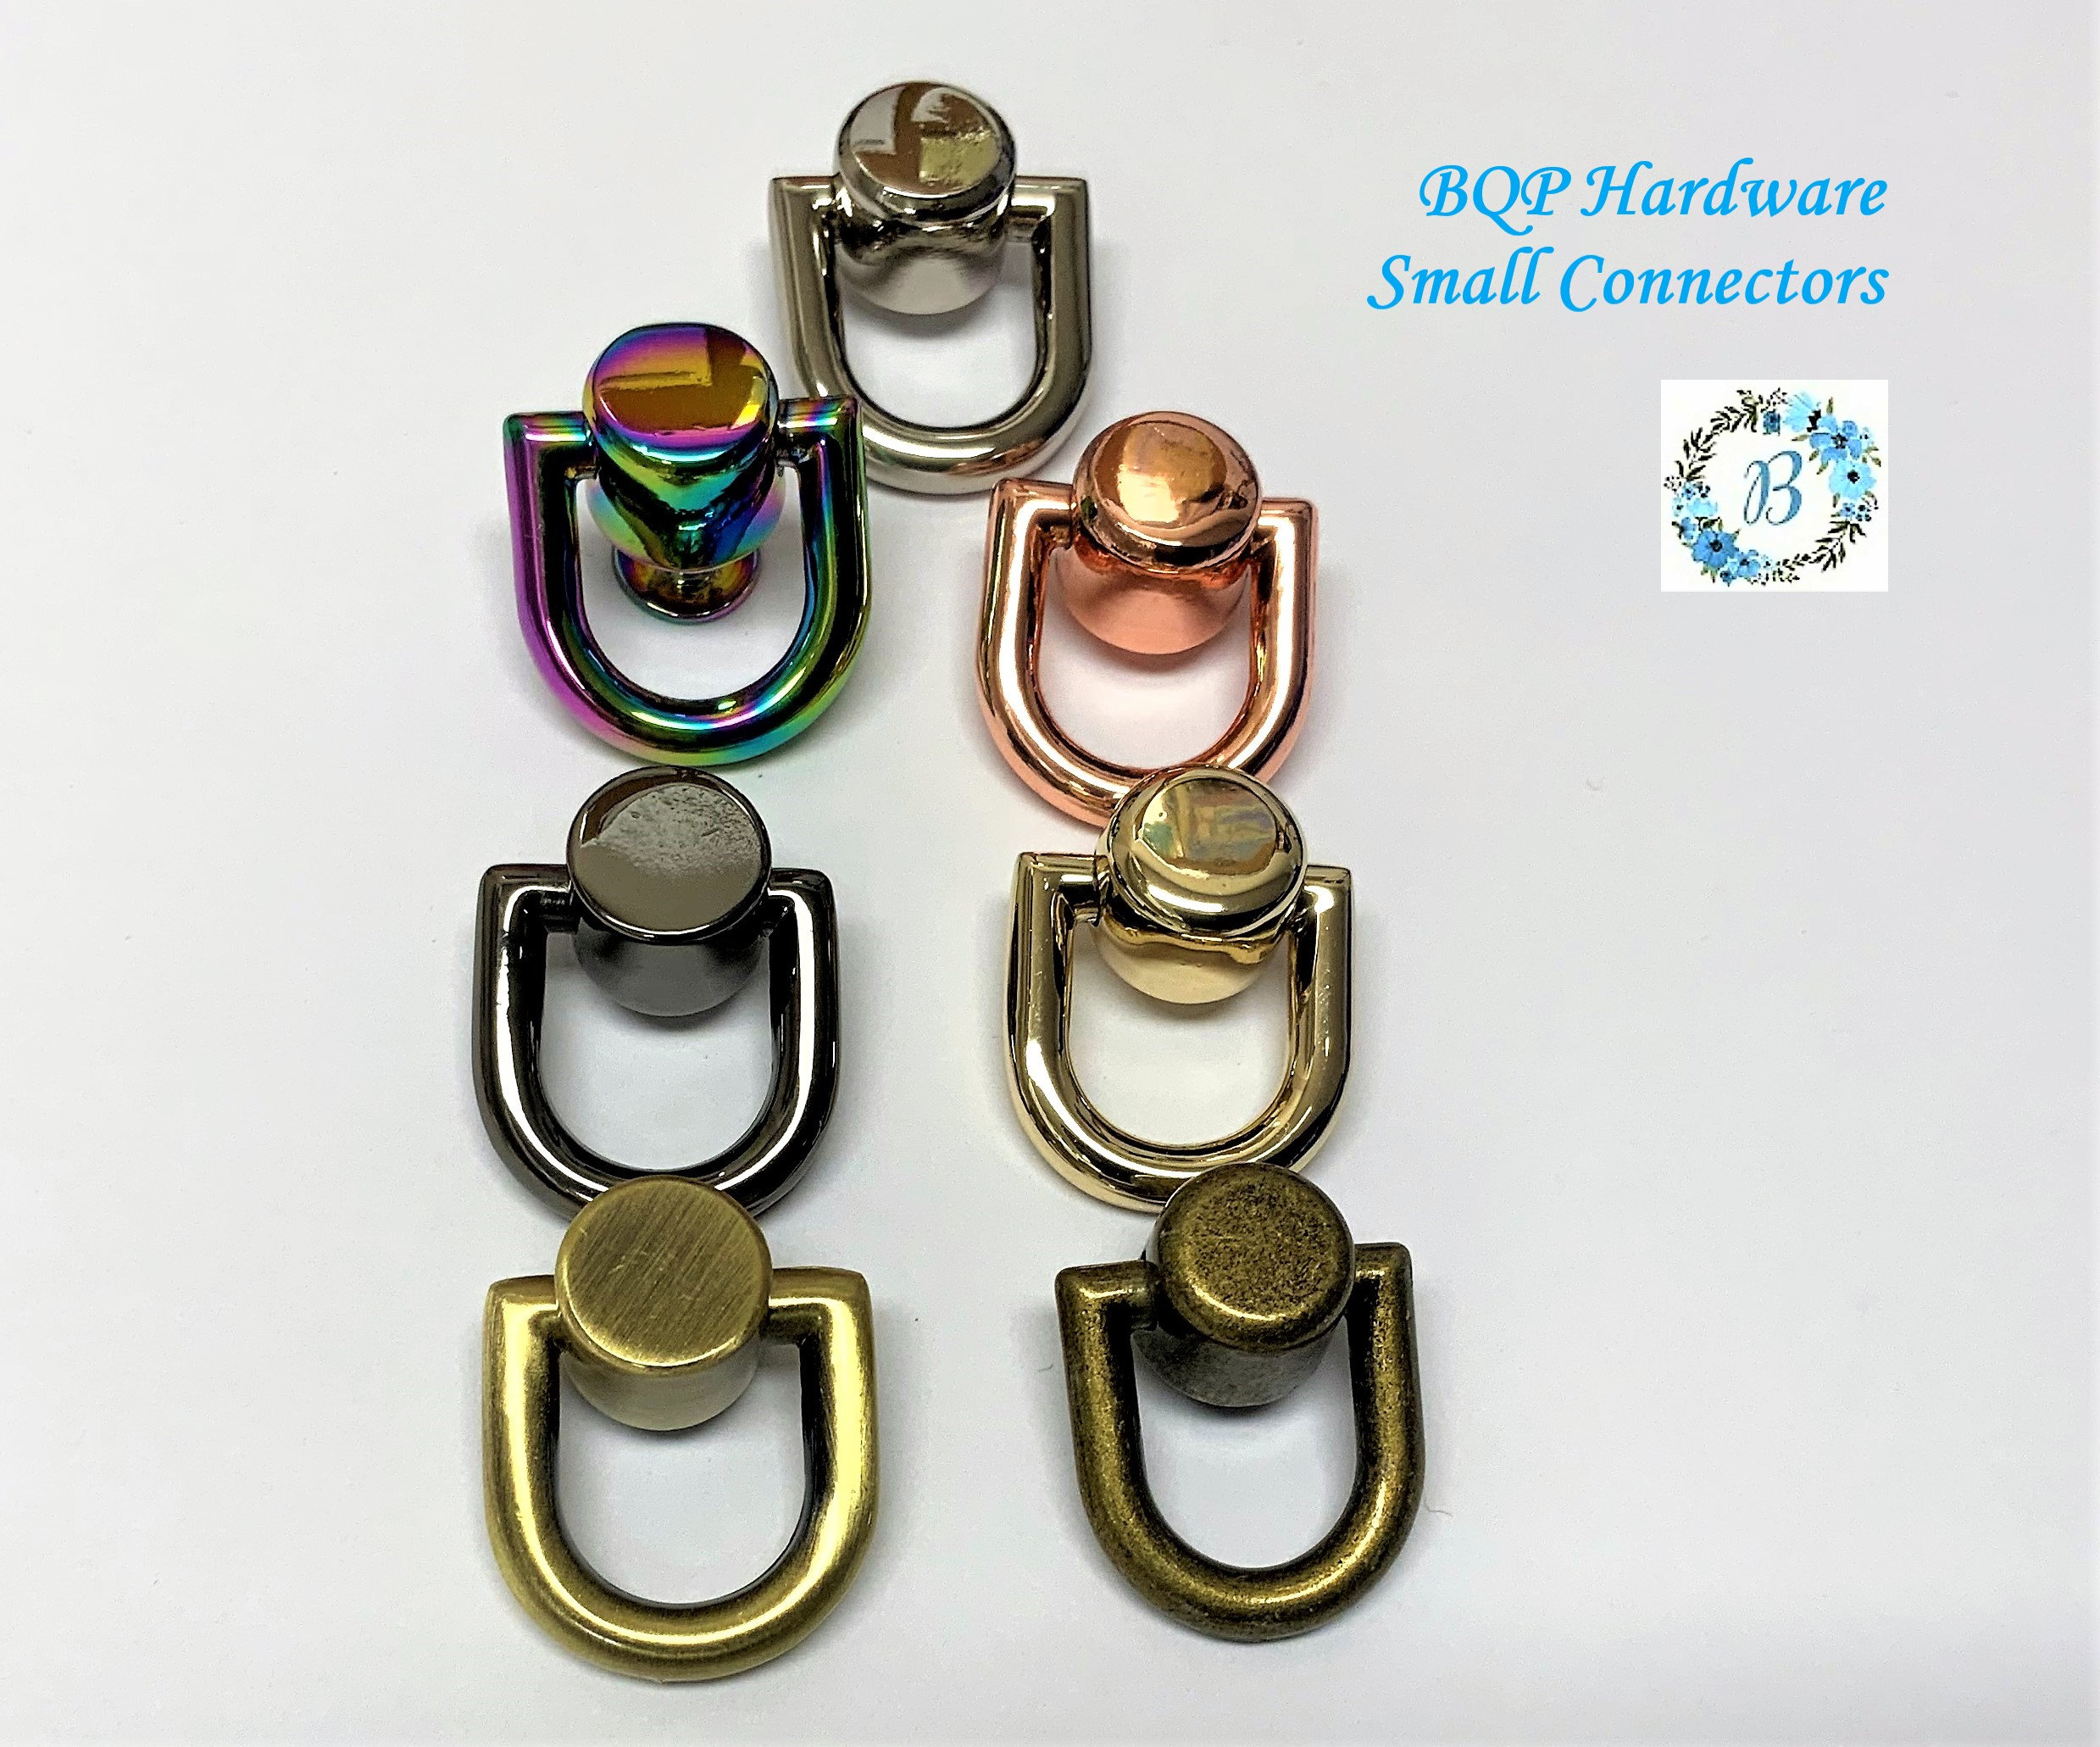 Purse Strap Hardware, Swivel Snap Clasp and D Ring 2 Piece Set, Fits 20mm  or 3/4 Inch Handbag Strap, 5 Metal Colors, Shipped From Canada 